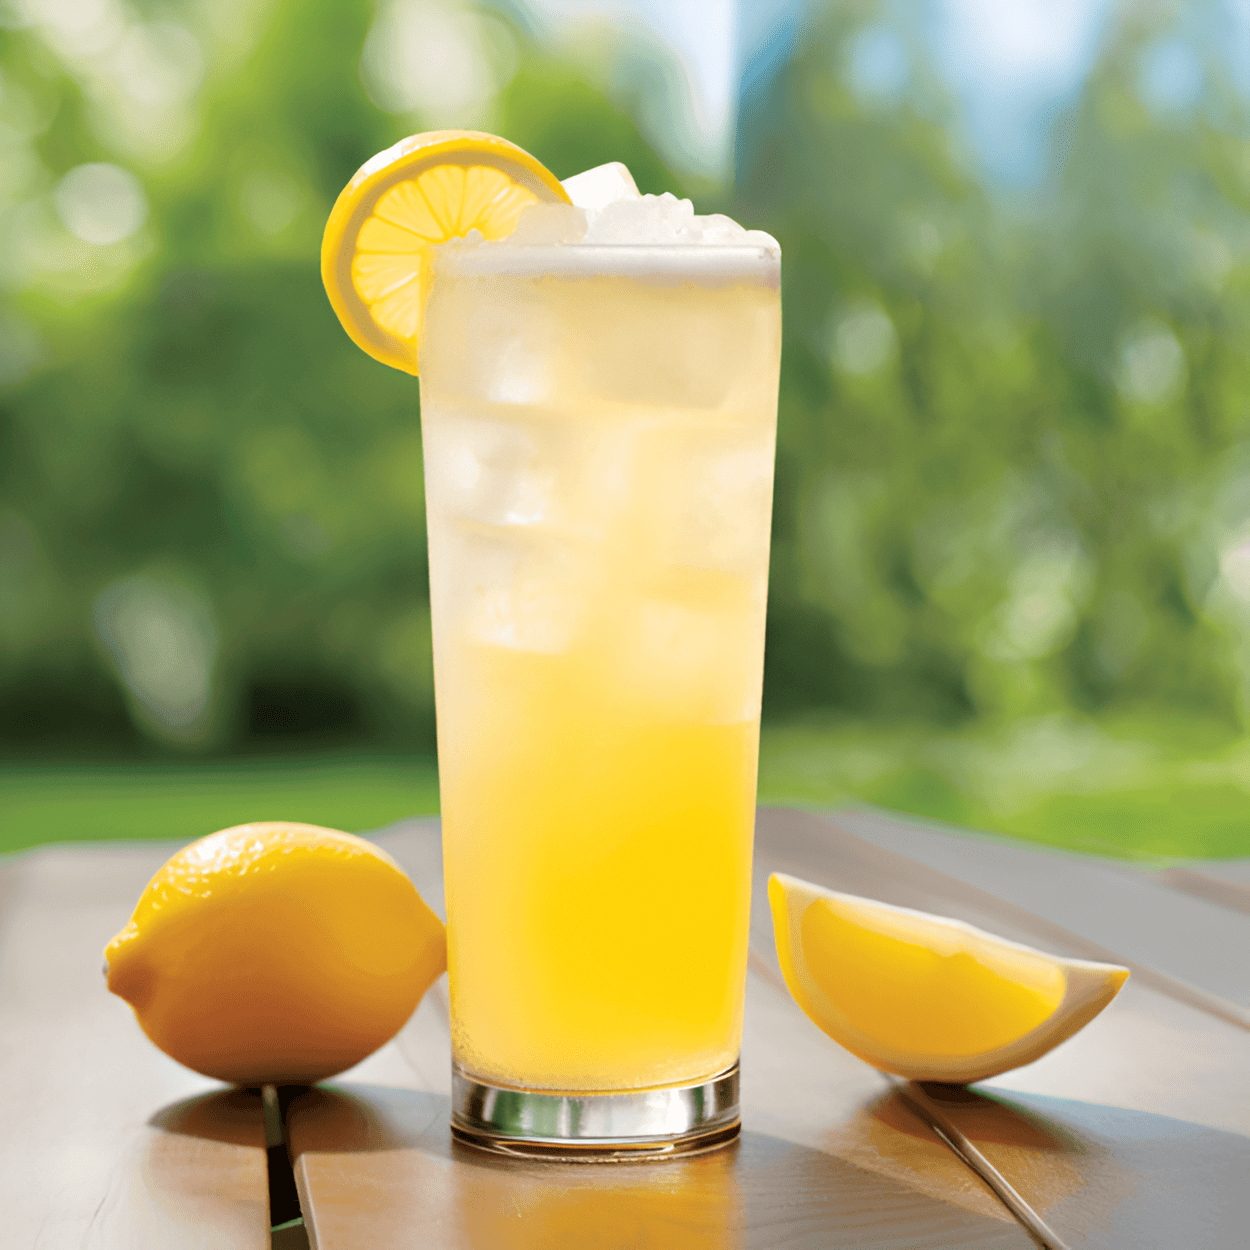 Radler Cocktail Recipe - The Radler has a light, refreshing taste. It's a bit sweet from the lemon soda, with a slight bitterness from the beer. The citrus notes from the lemon make it tangy and zesty, while the carbonation gives it a nice fizz.